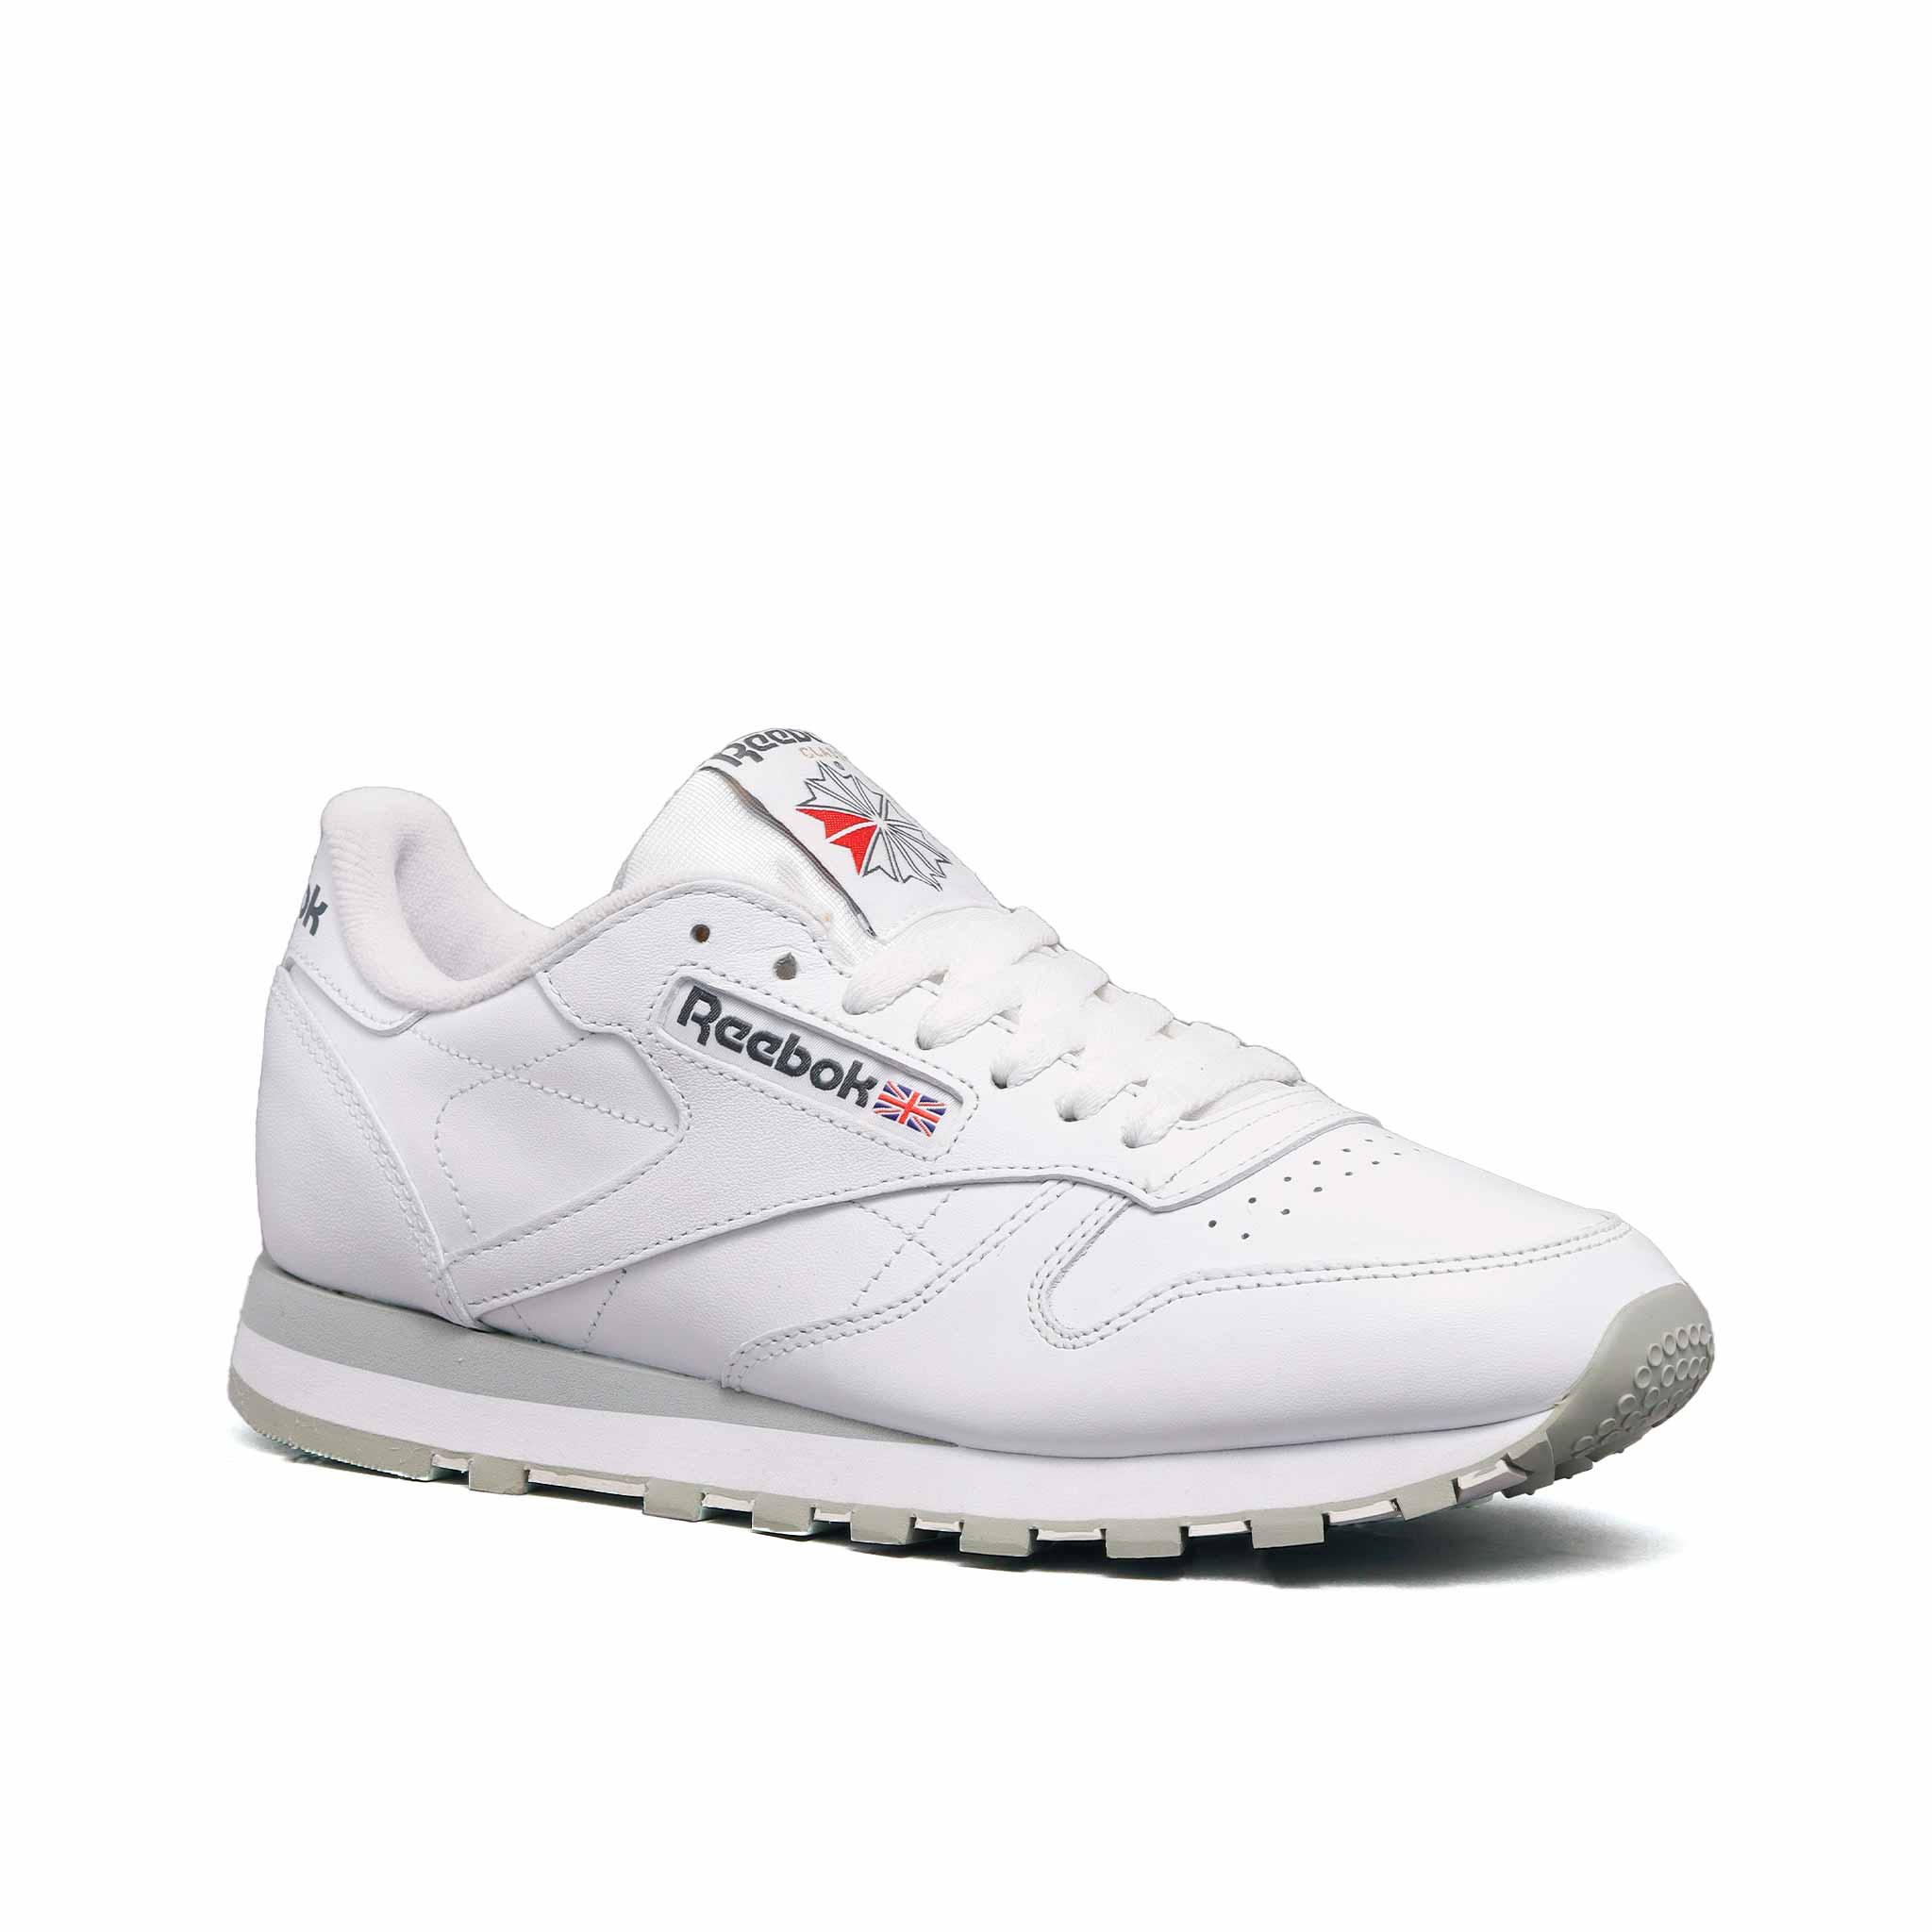 Tenis Reebok Classic Leather Hombre Casual Blanco